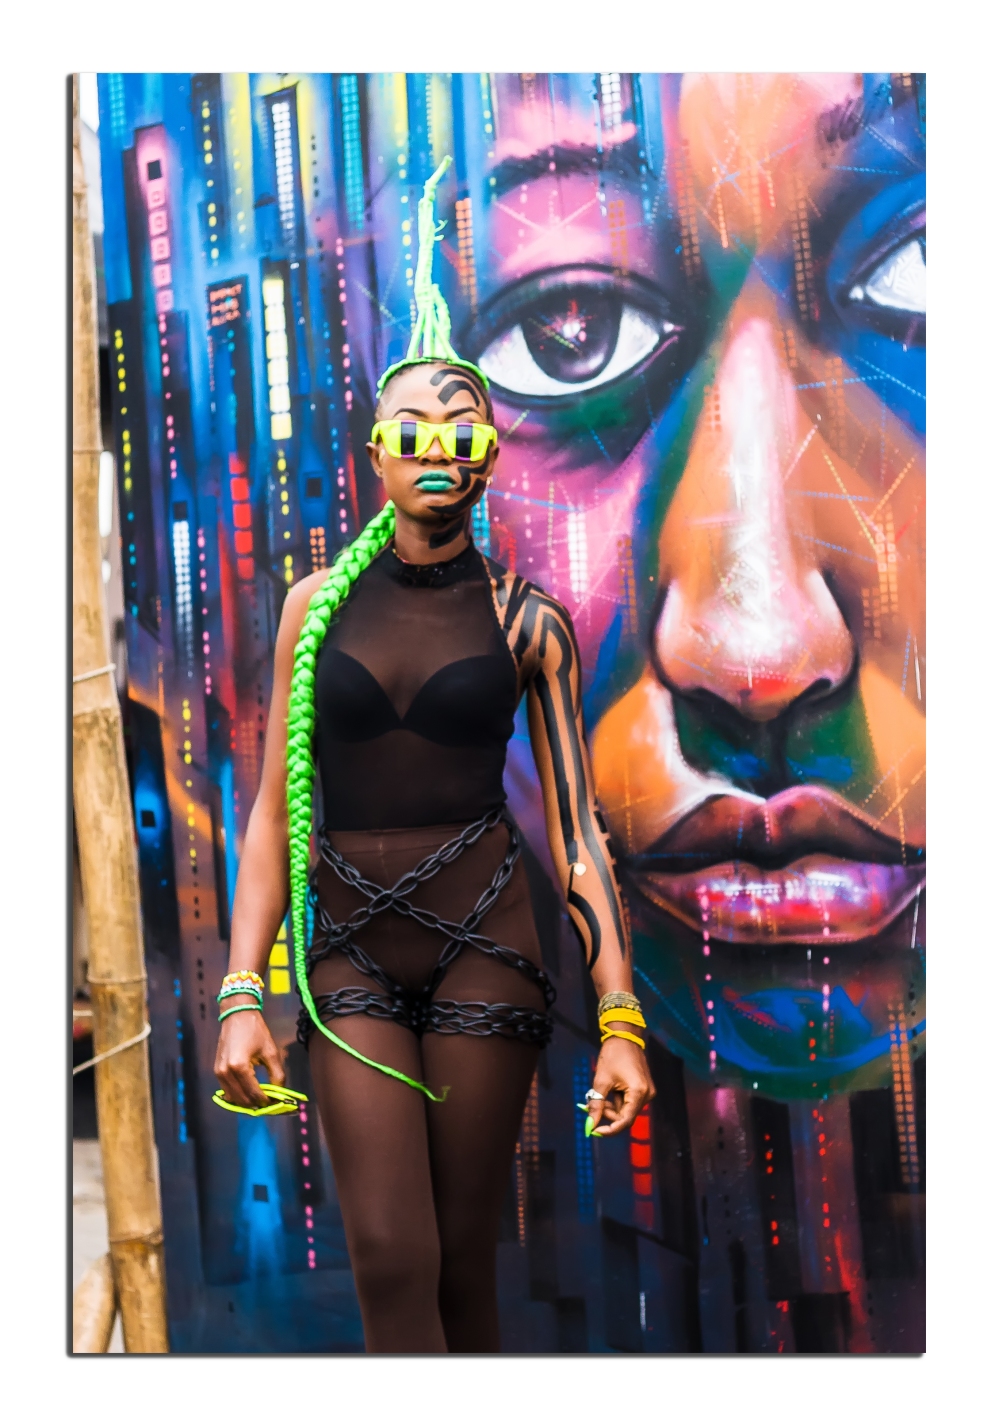 The Chale Wote Street Art Festival picture